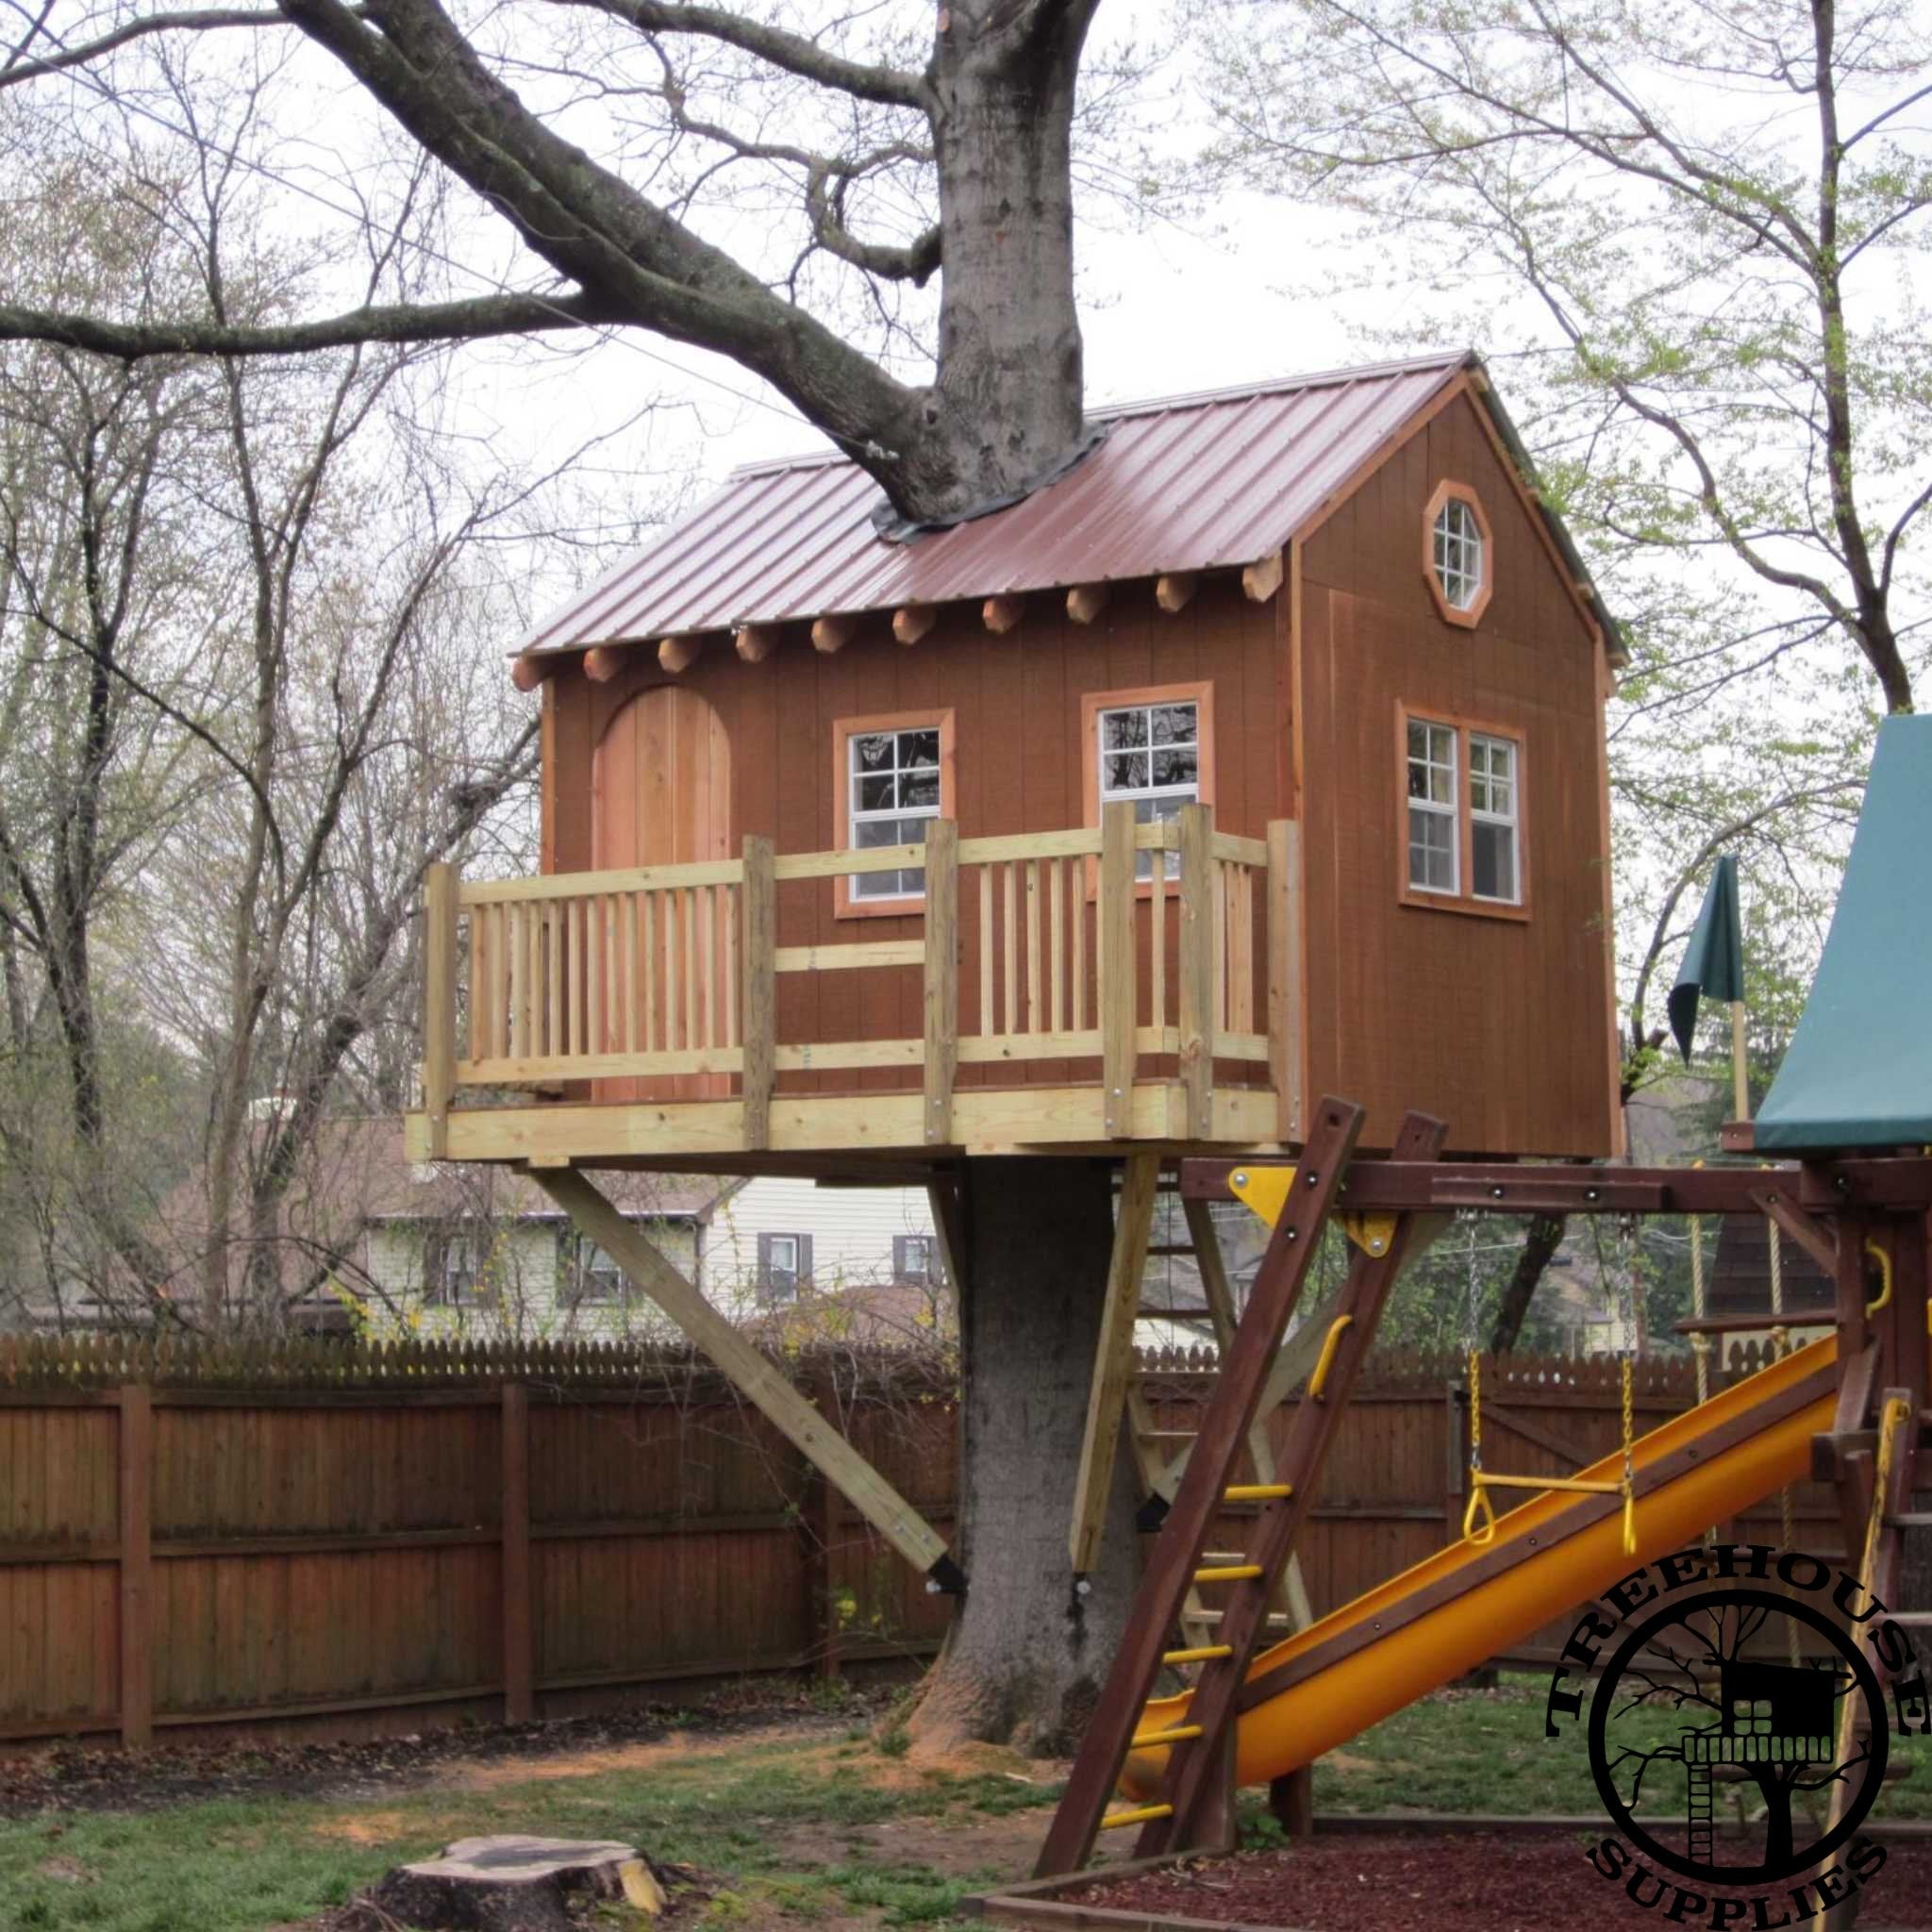 8' SQUARE TREEHOUSE PLAN - NOW INCLUDES STEP-BY-STEP 3D MODELING!! - Treehouse Supplies